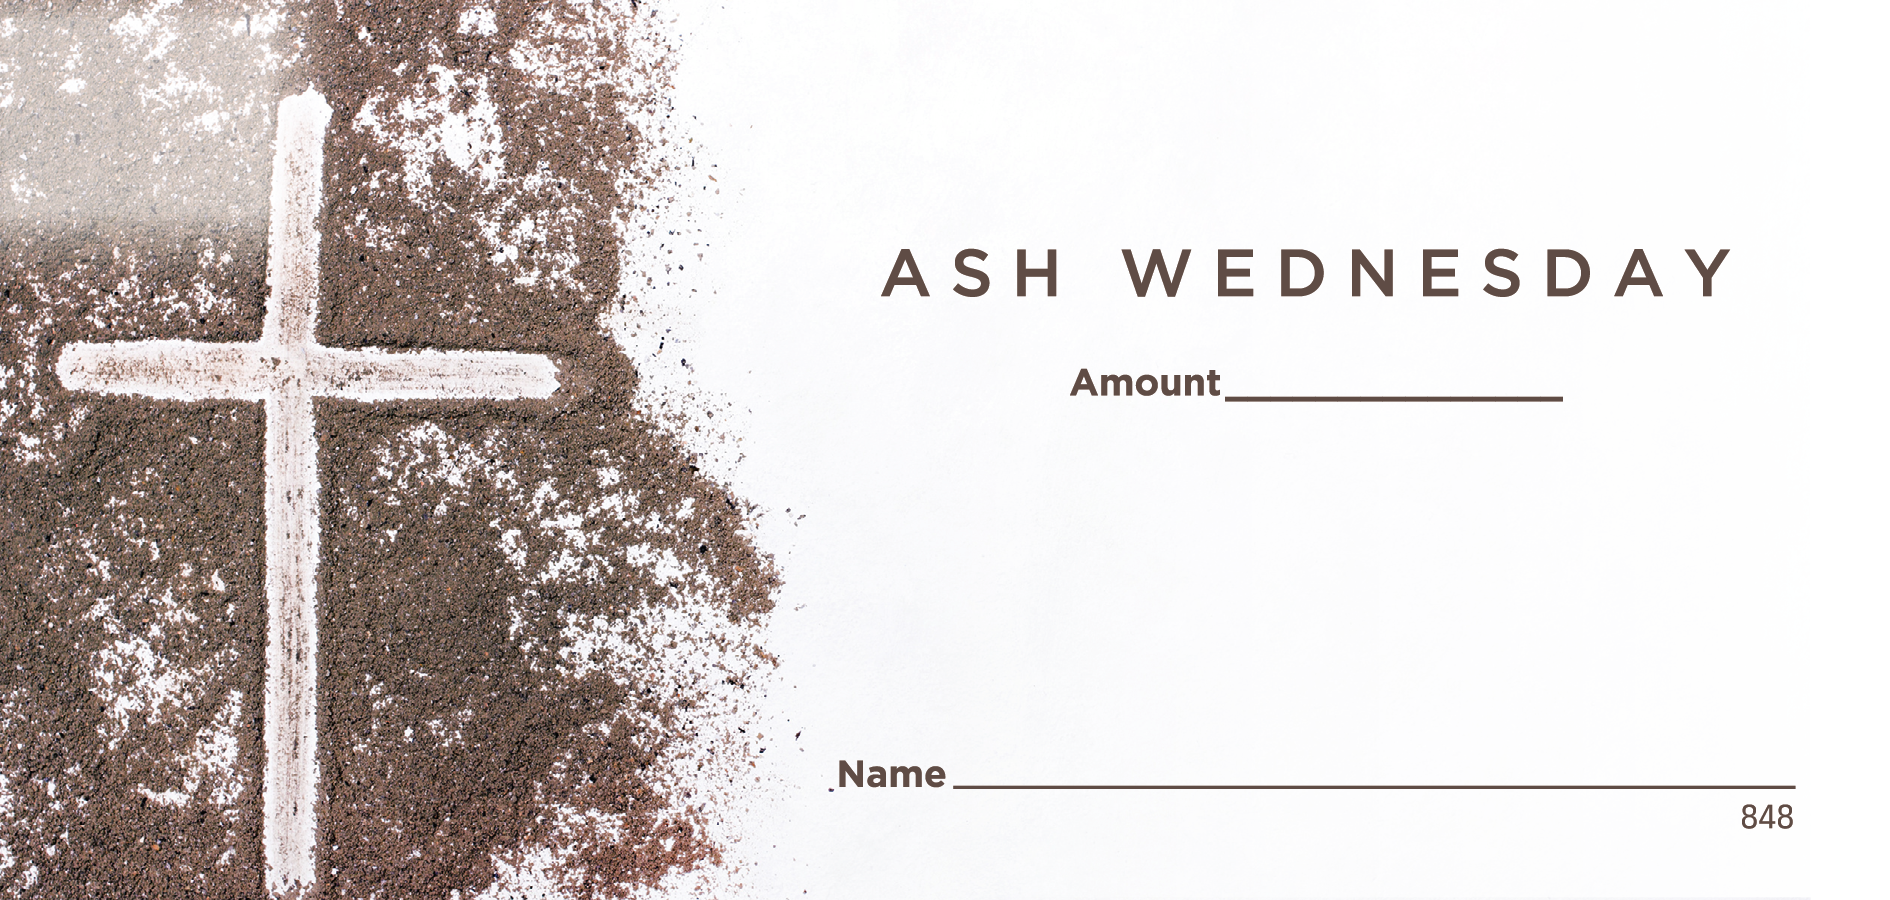 NCS National Church Solutions Ash Wednesday Offering Envelope